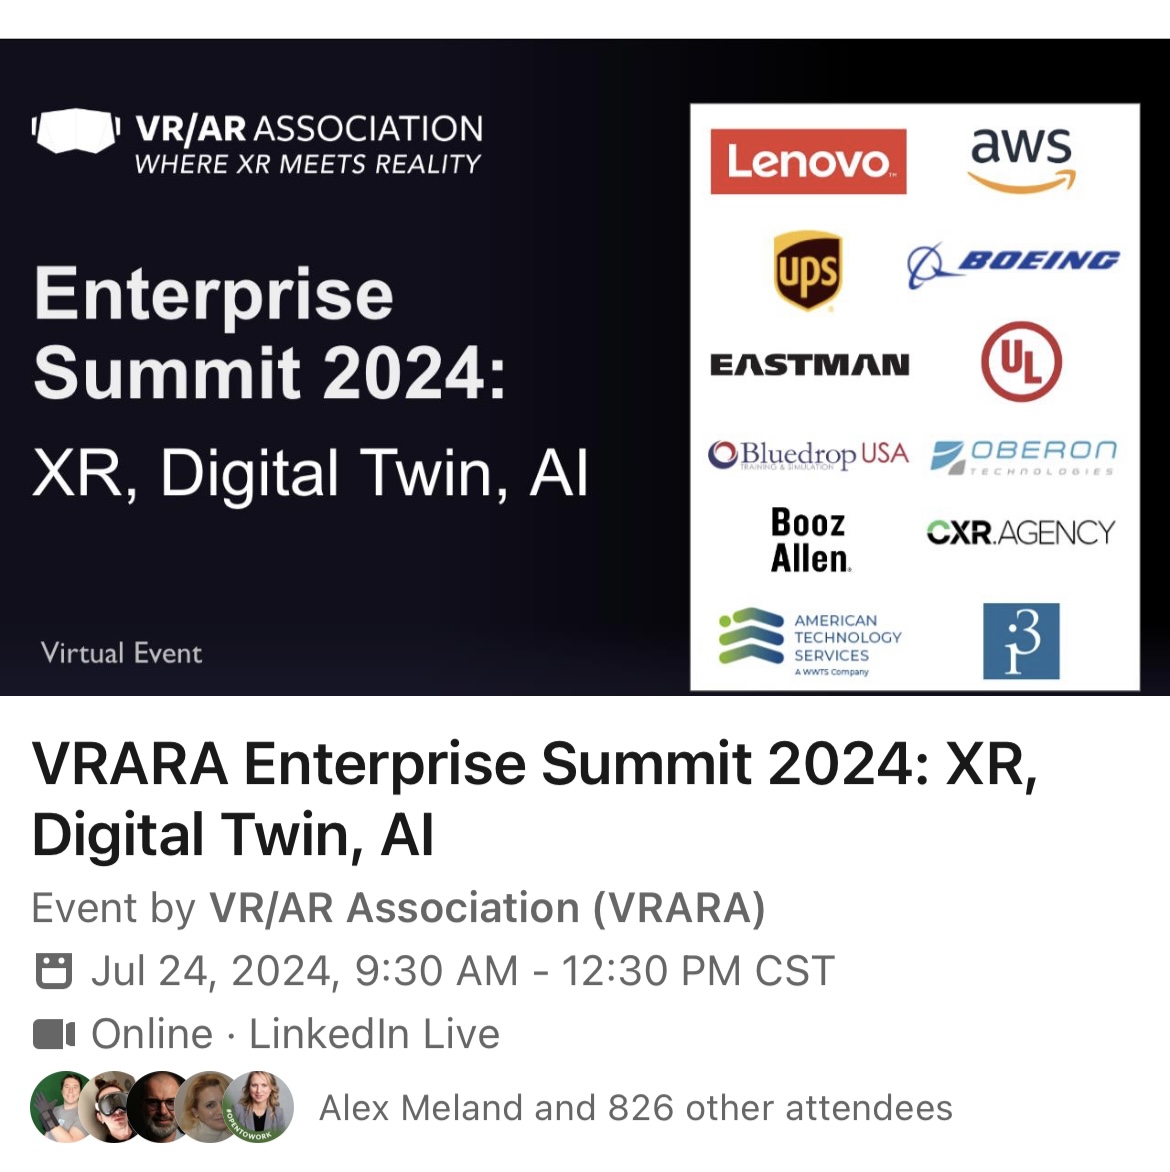 📢 800+ already registered for our annual Enterprise Summit linkedin.com/events/7186048… on XR, Digital Twin, and AI.. with 30+ speakers from Boeing, UPS, Amazon, Lenovo, others. #spatialcomputing #aws #apple #meta #genai #mixedreality